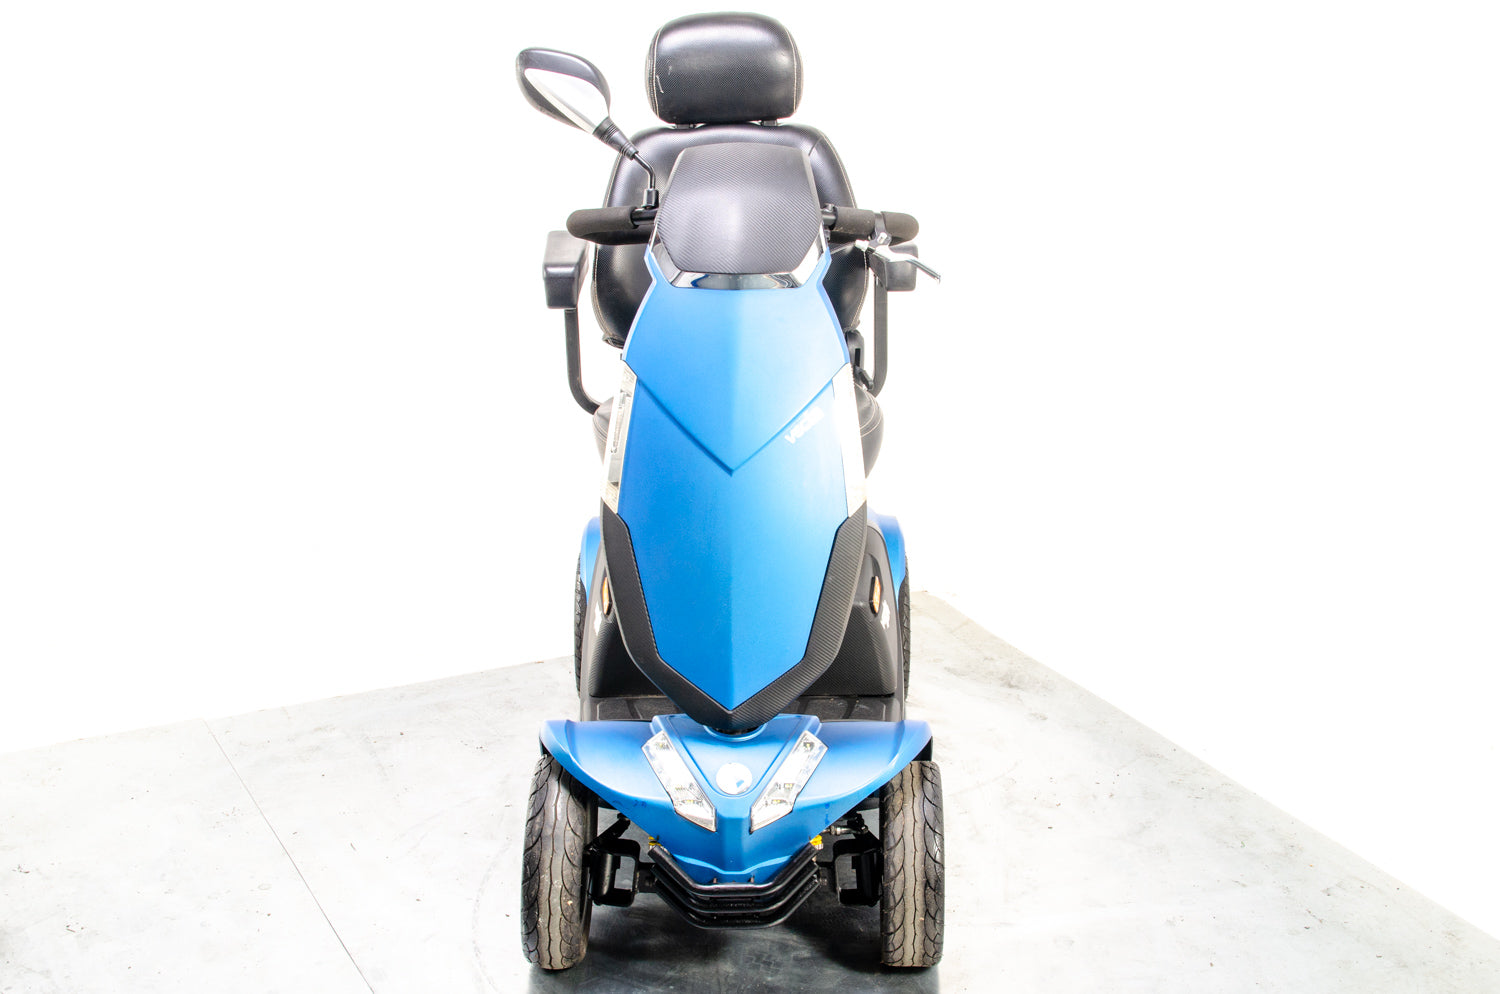 Rascal Vecta Sport Used Electric Mobility Scooter 8mph Suspension Max Grip All-Terrain Road Legal Blue 13514